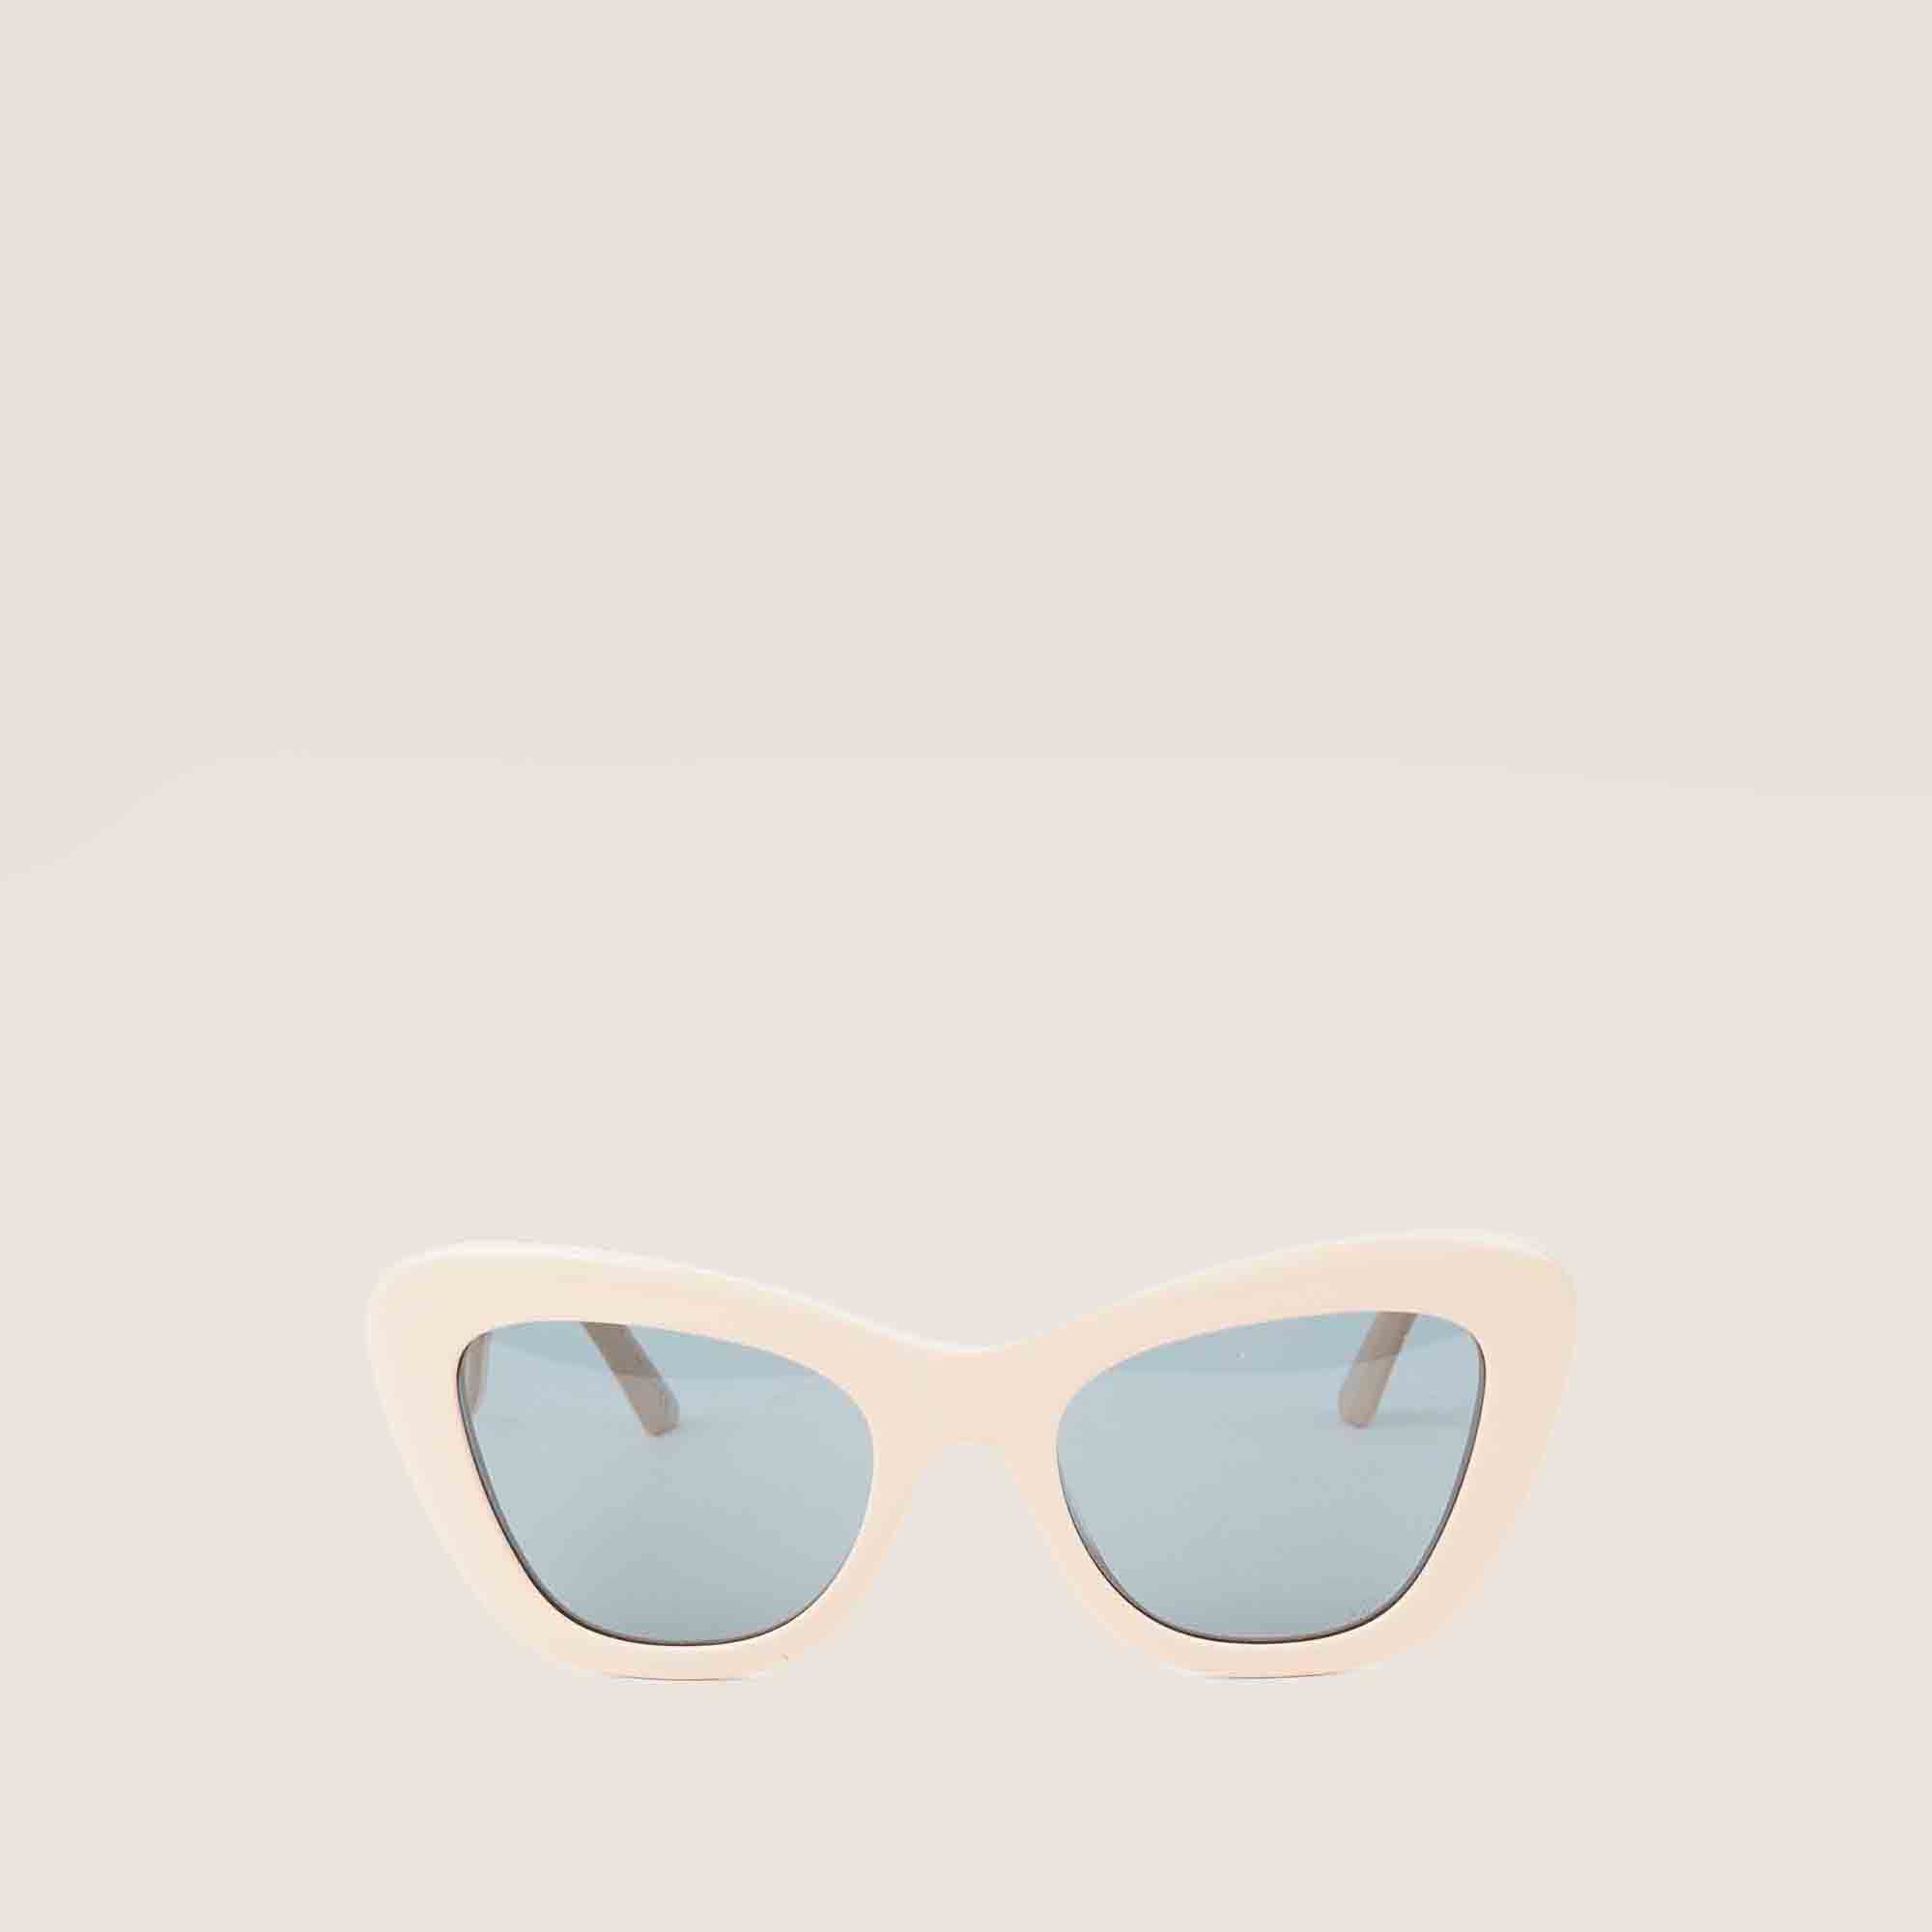 Dior Bobby Sunglasses - CHRISTIAN DIOR - Affordable Luxury